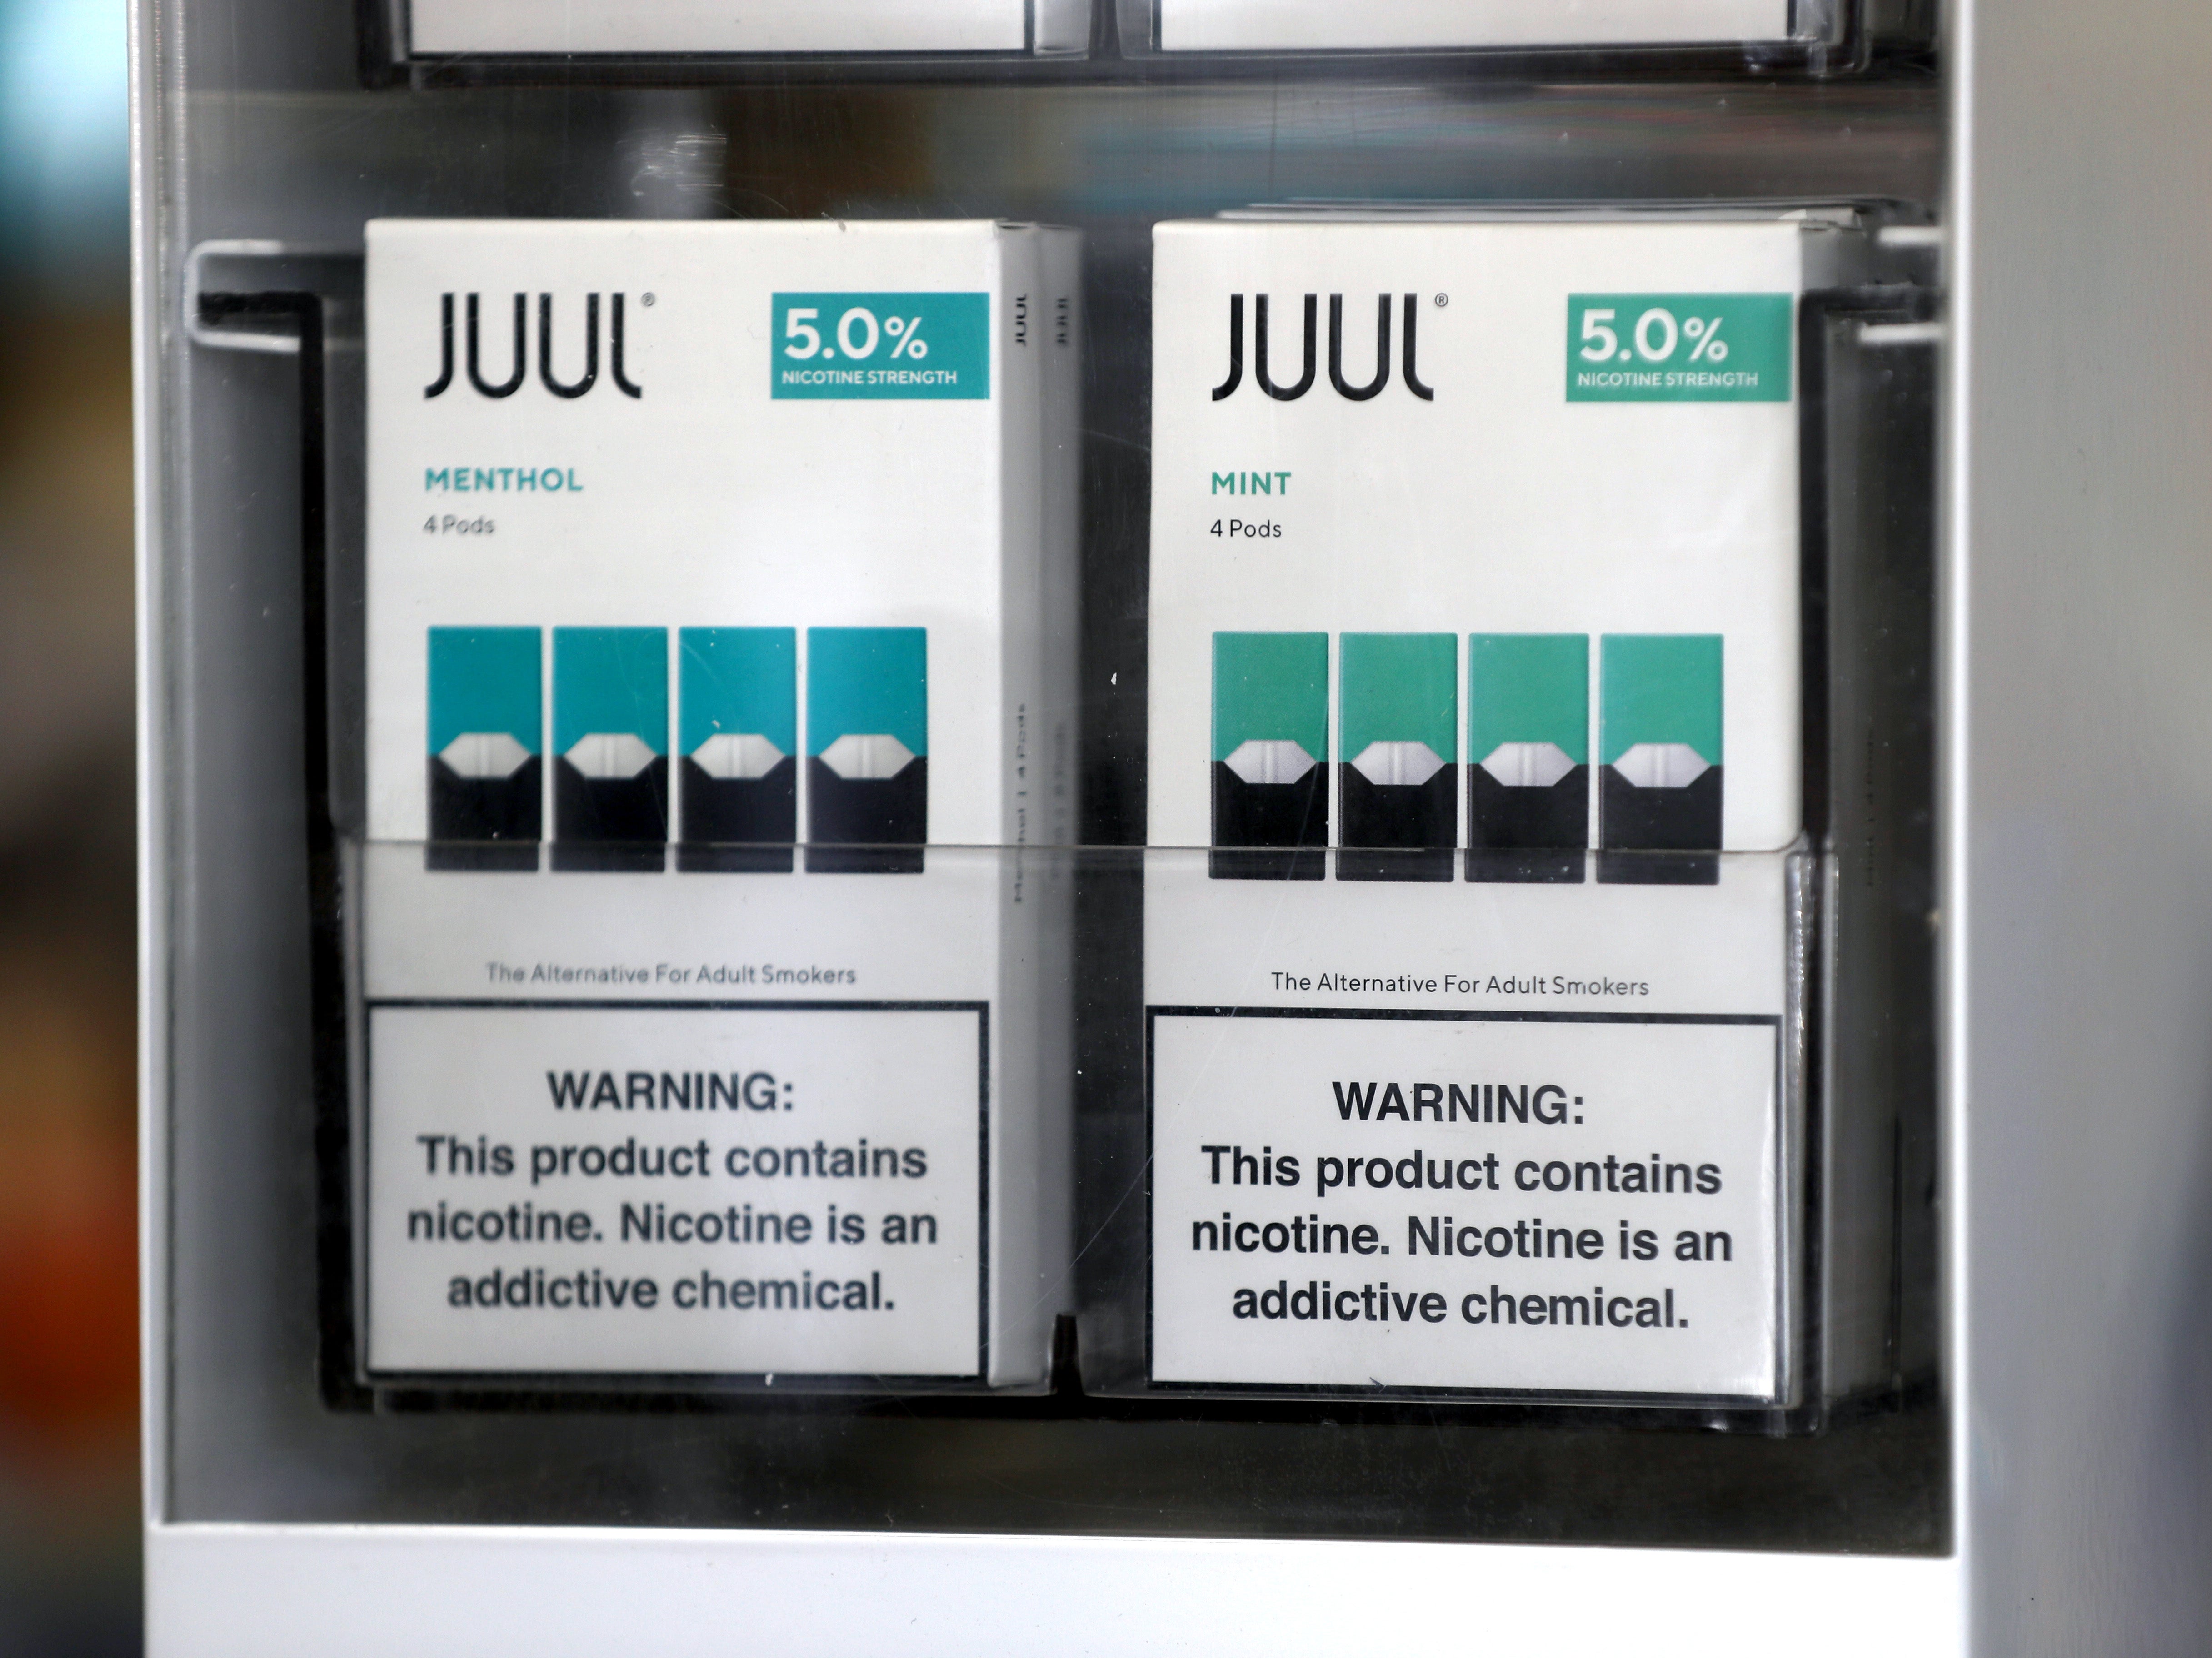 Packages of Juul mint flavored e-cigarettes are displayed at San Rafael Smokeshop on November 07, 2019 in San Rafael, California